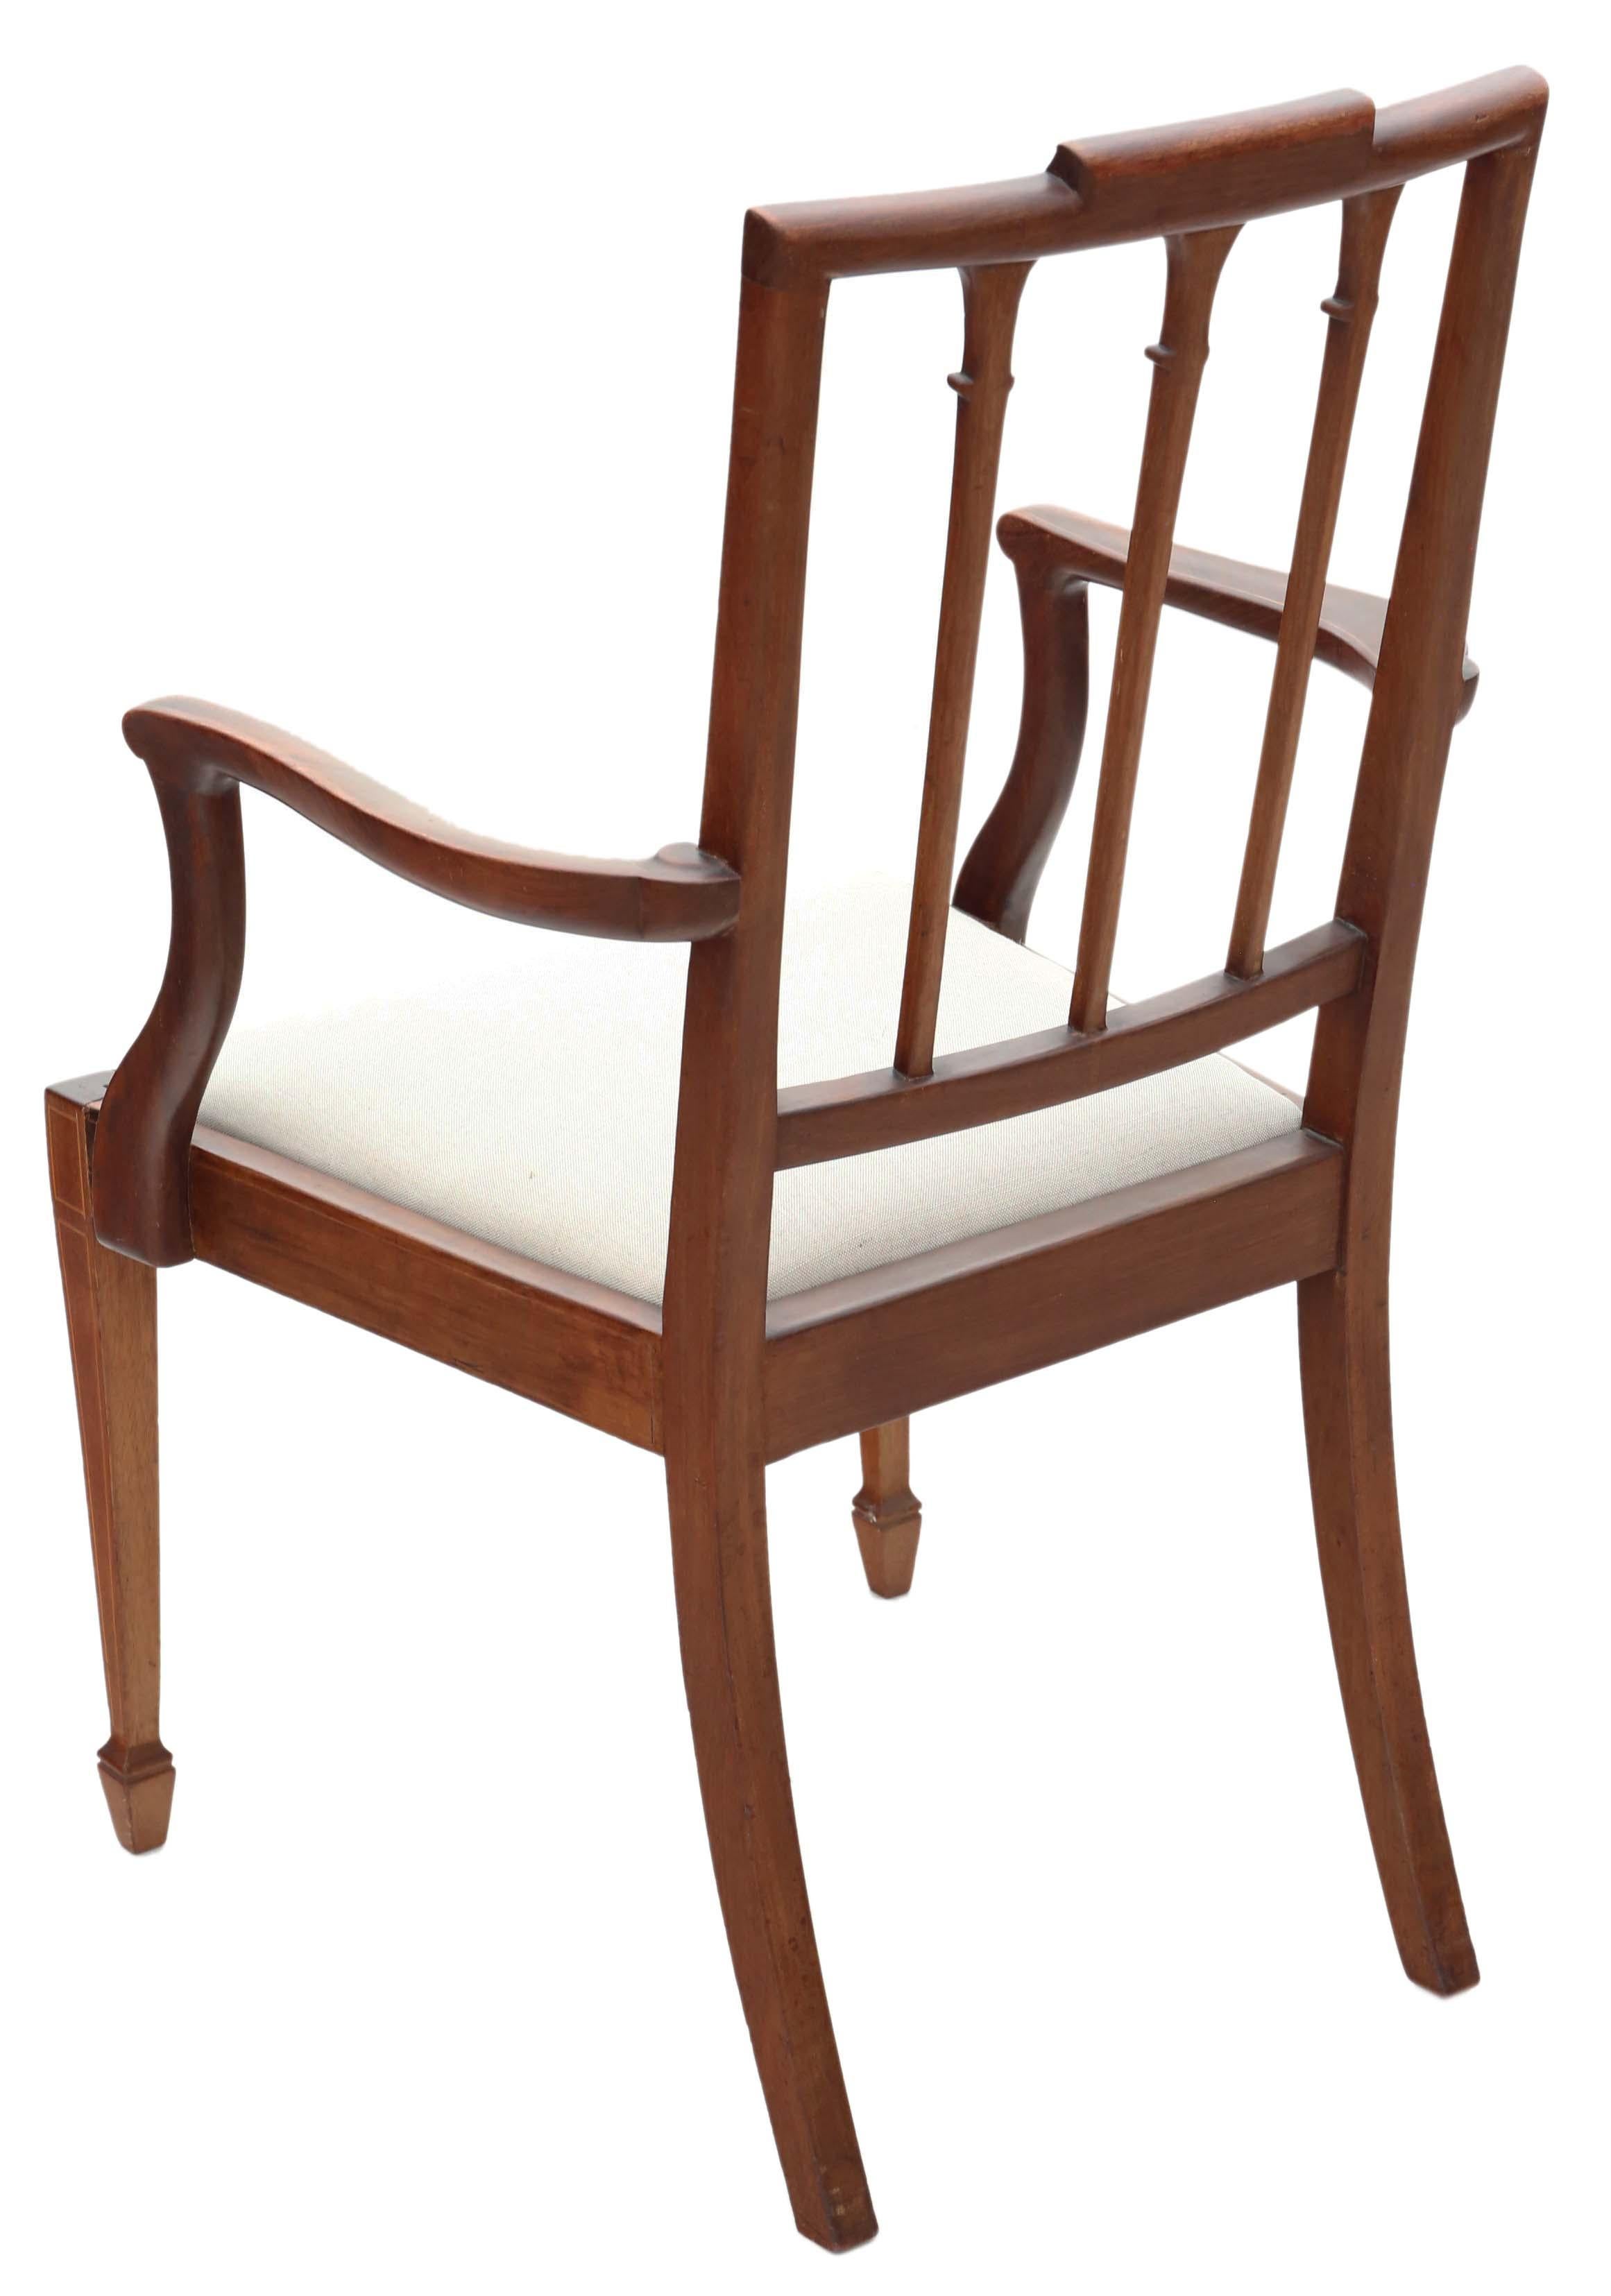 Wood Georgian Revival Mahogany Dining Chairs: Set of 8 (6 + 2), Antique Quality, C190 For Sale